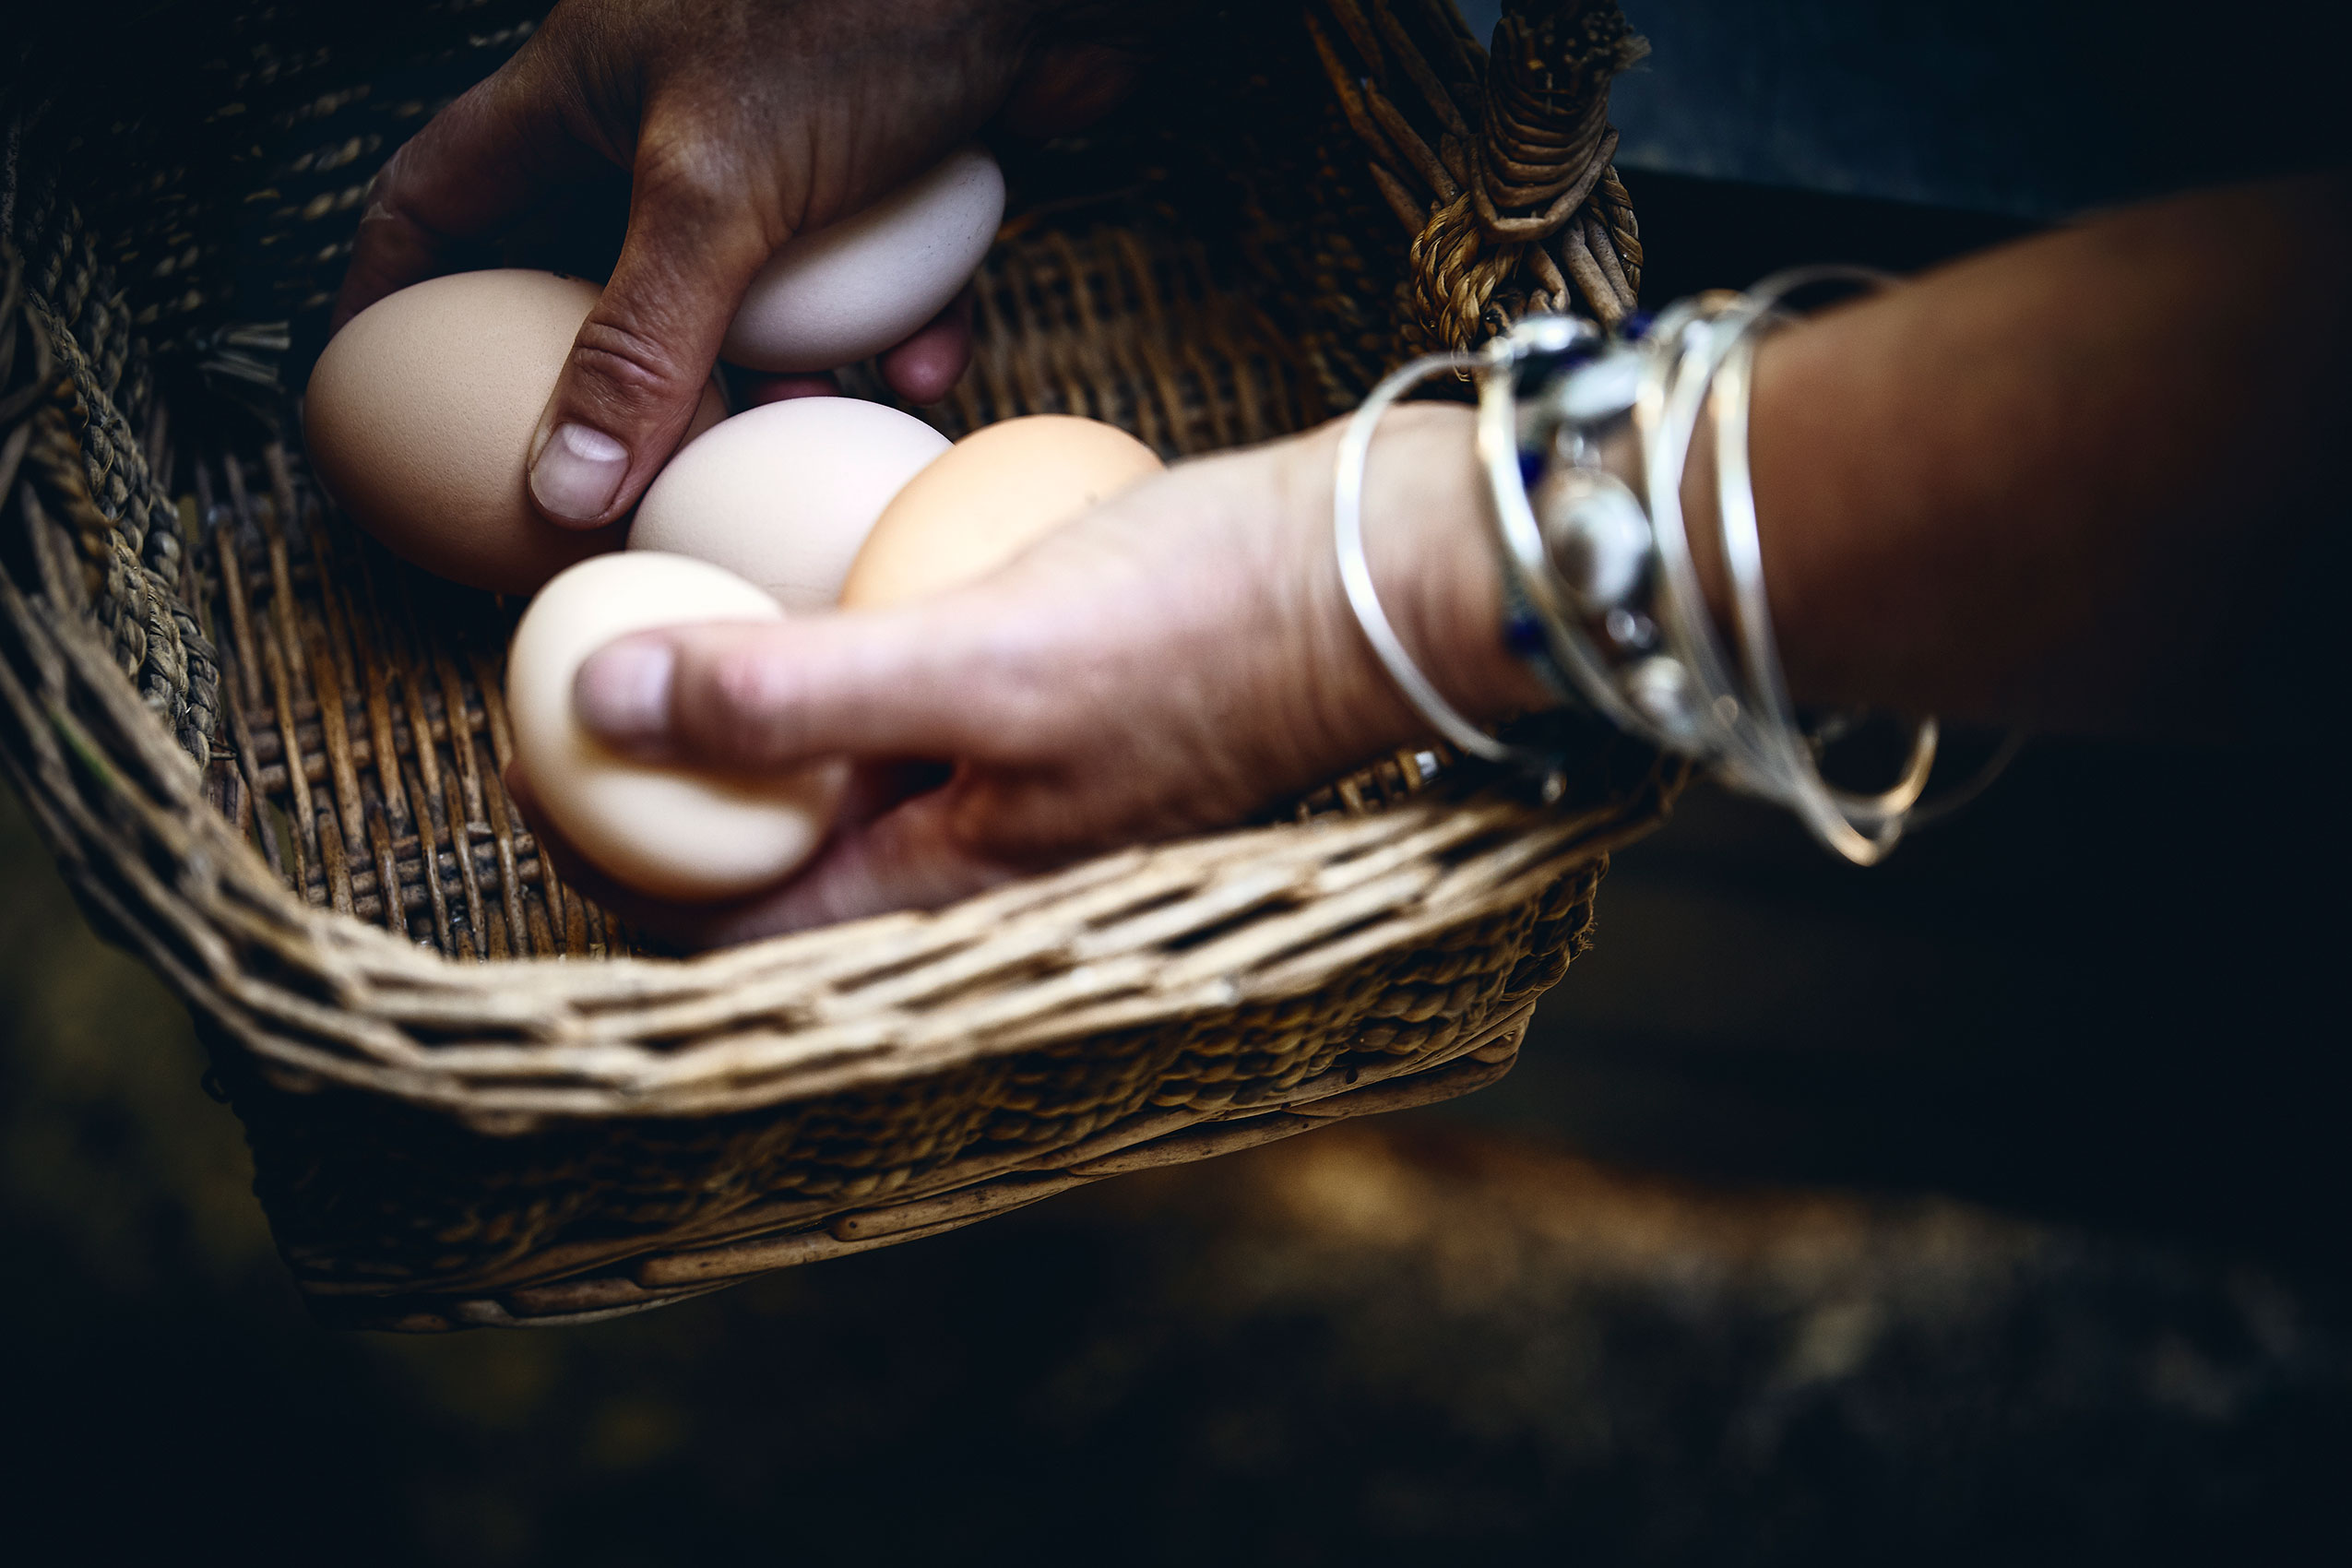 Shared Kitchen • Fresh Pale Brown Eggs in Natural Cane Basket • Lifestyle & Editorial Food Photography